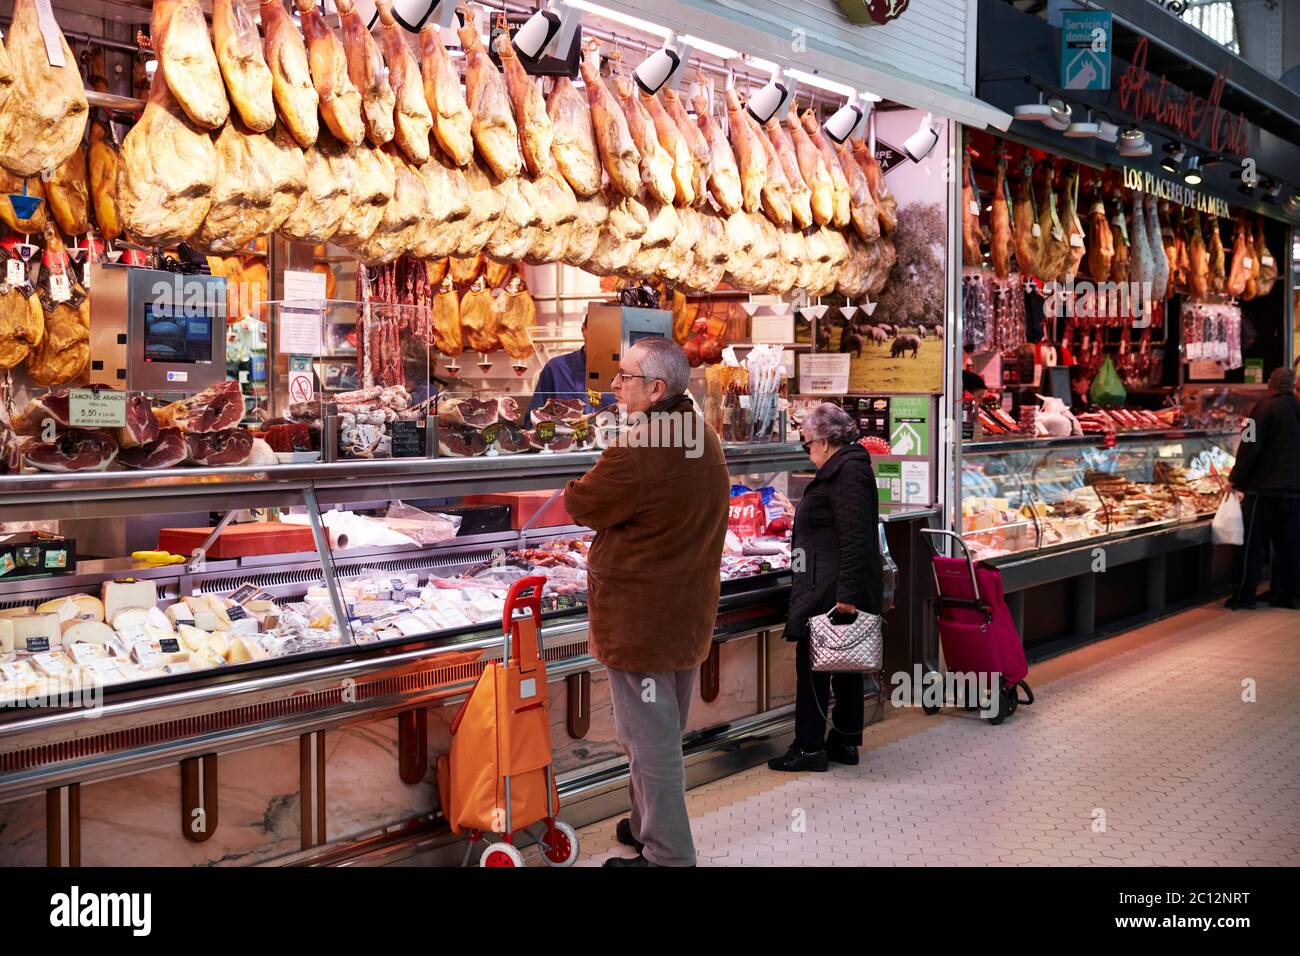 Stalls selling cured meat and cheeses in Central Market Valencia, Spain. Stock Photo